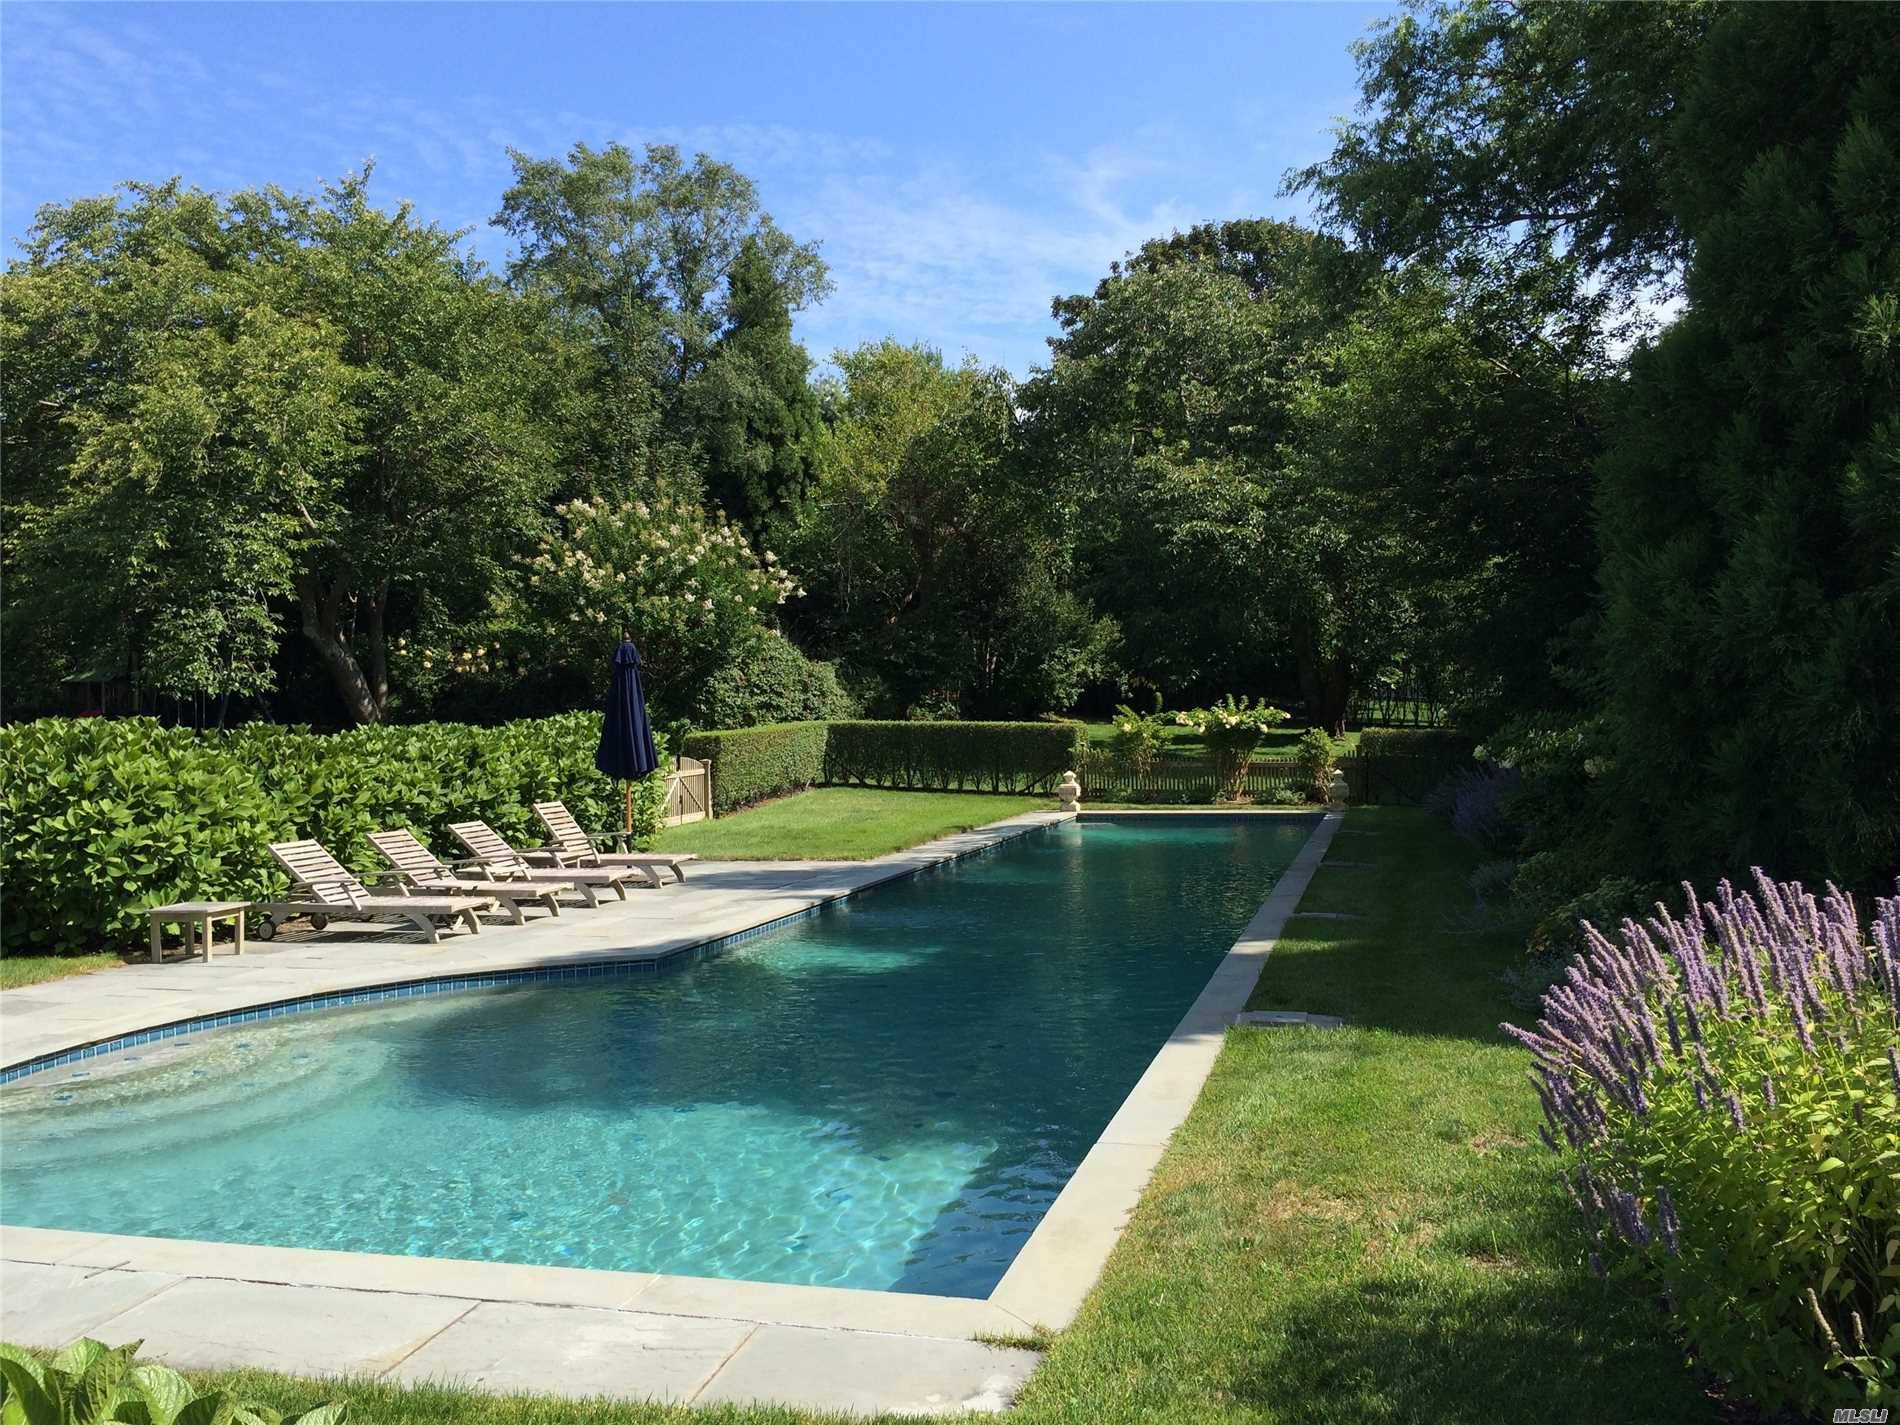 Gorgeous 1. 1 acre property hosts a recently renovated 4 bedroom and 4 bath home on a desirable street in East Hampton Village.